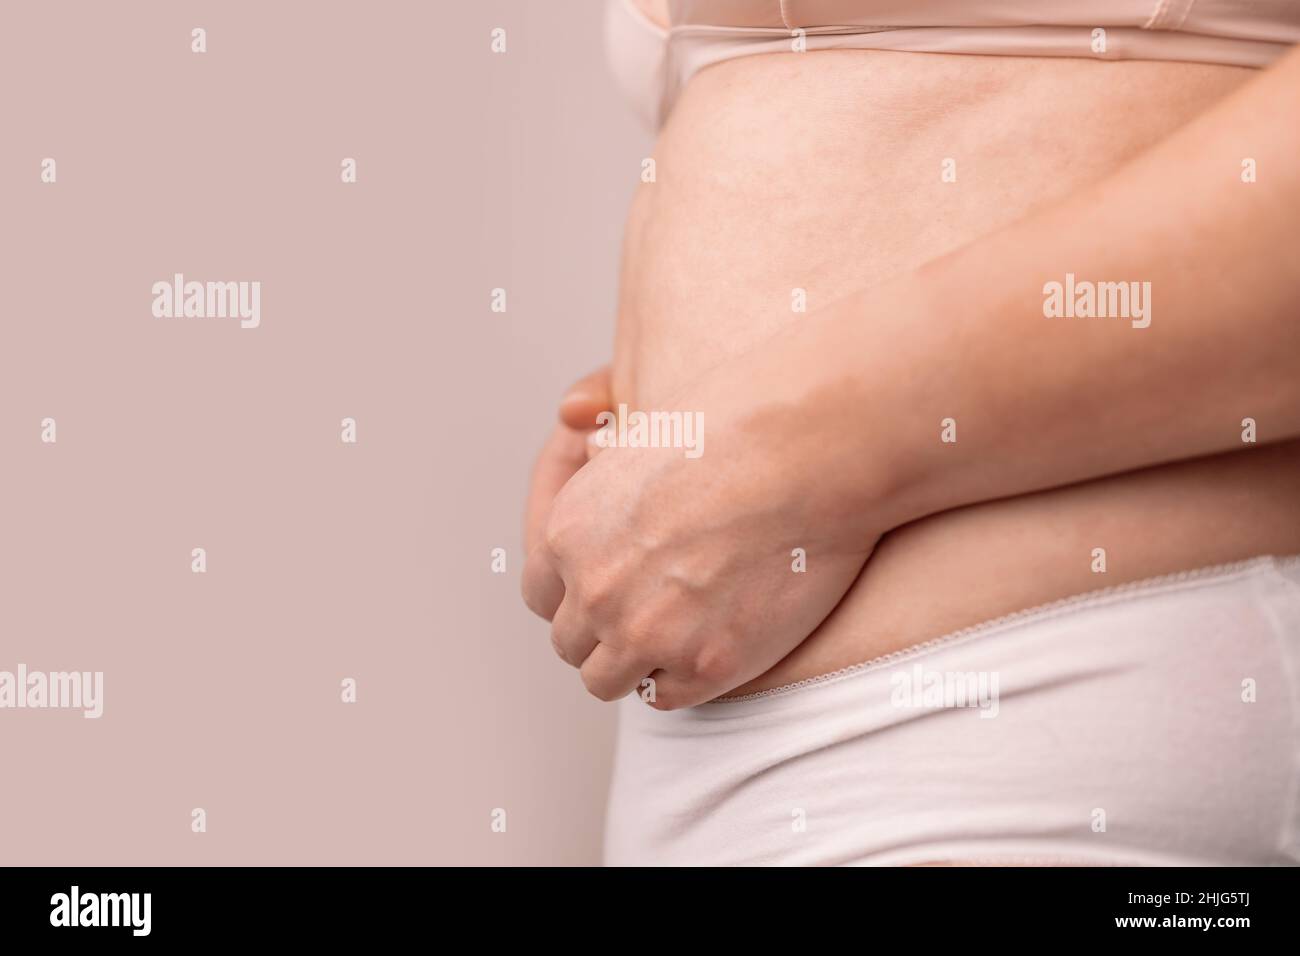 Very fat man demonstrate his big belly Stock Photo - Alamy